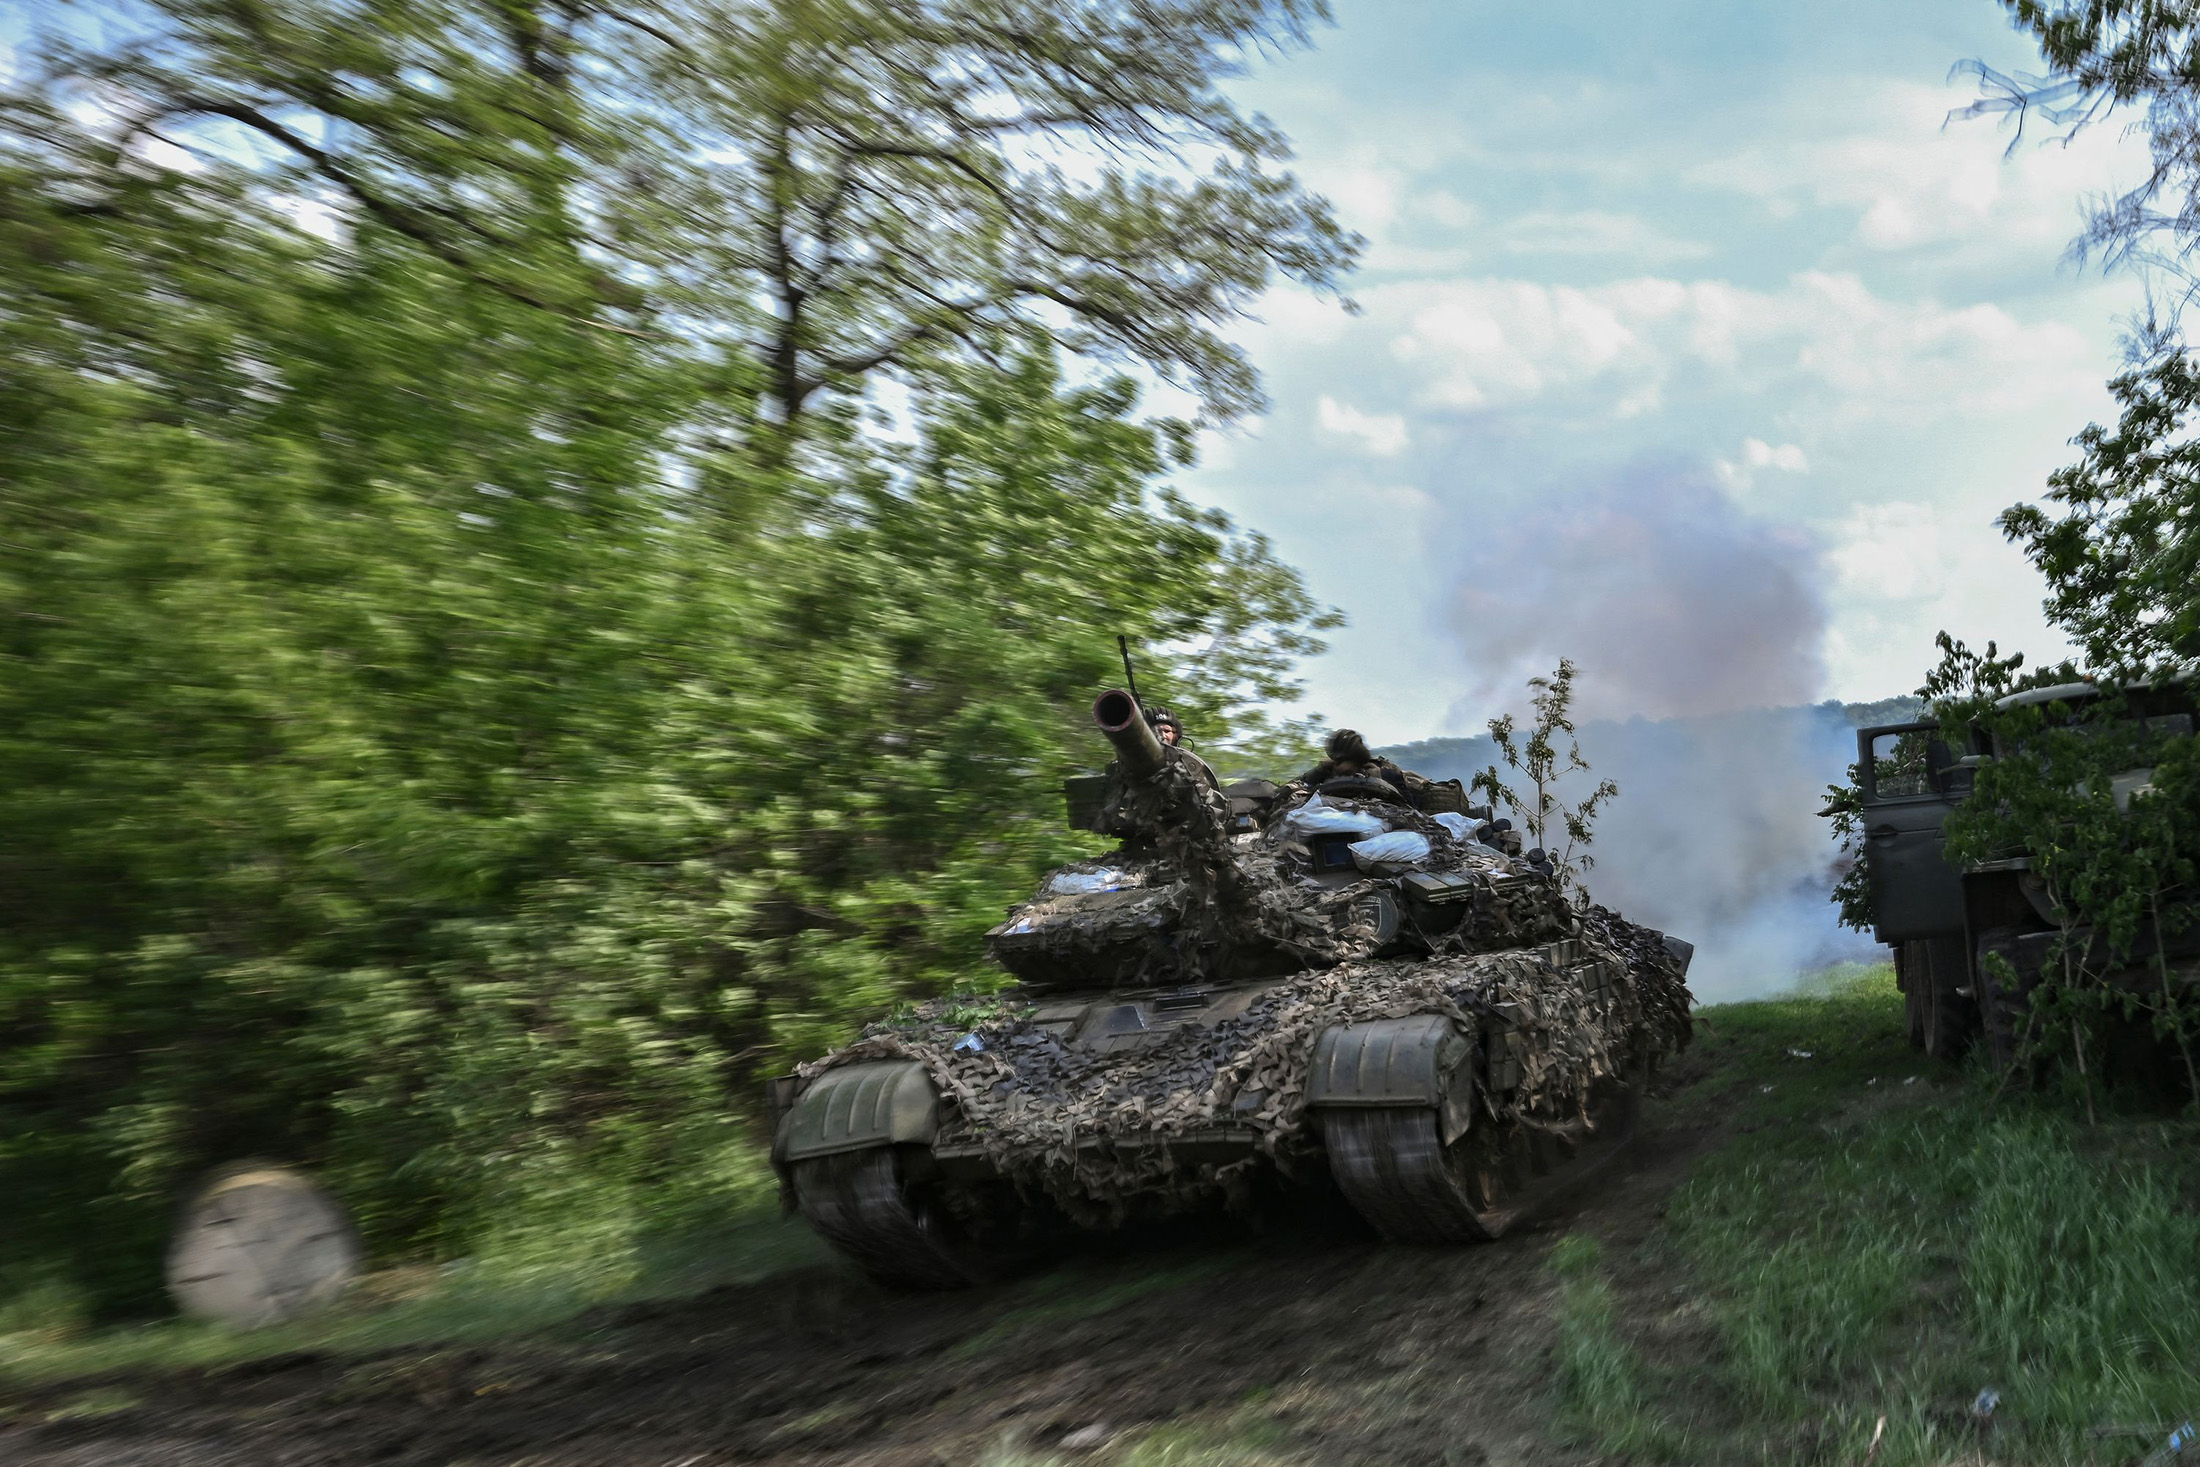 Ukrainian service members operate a tank at a front line position near the city of Lysychansk, eastern Ukraine, on May 20.